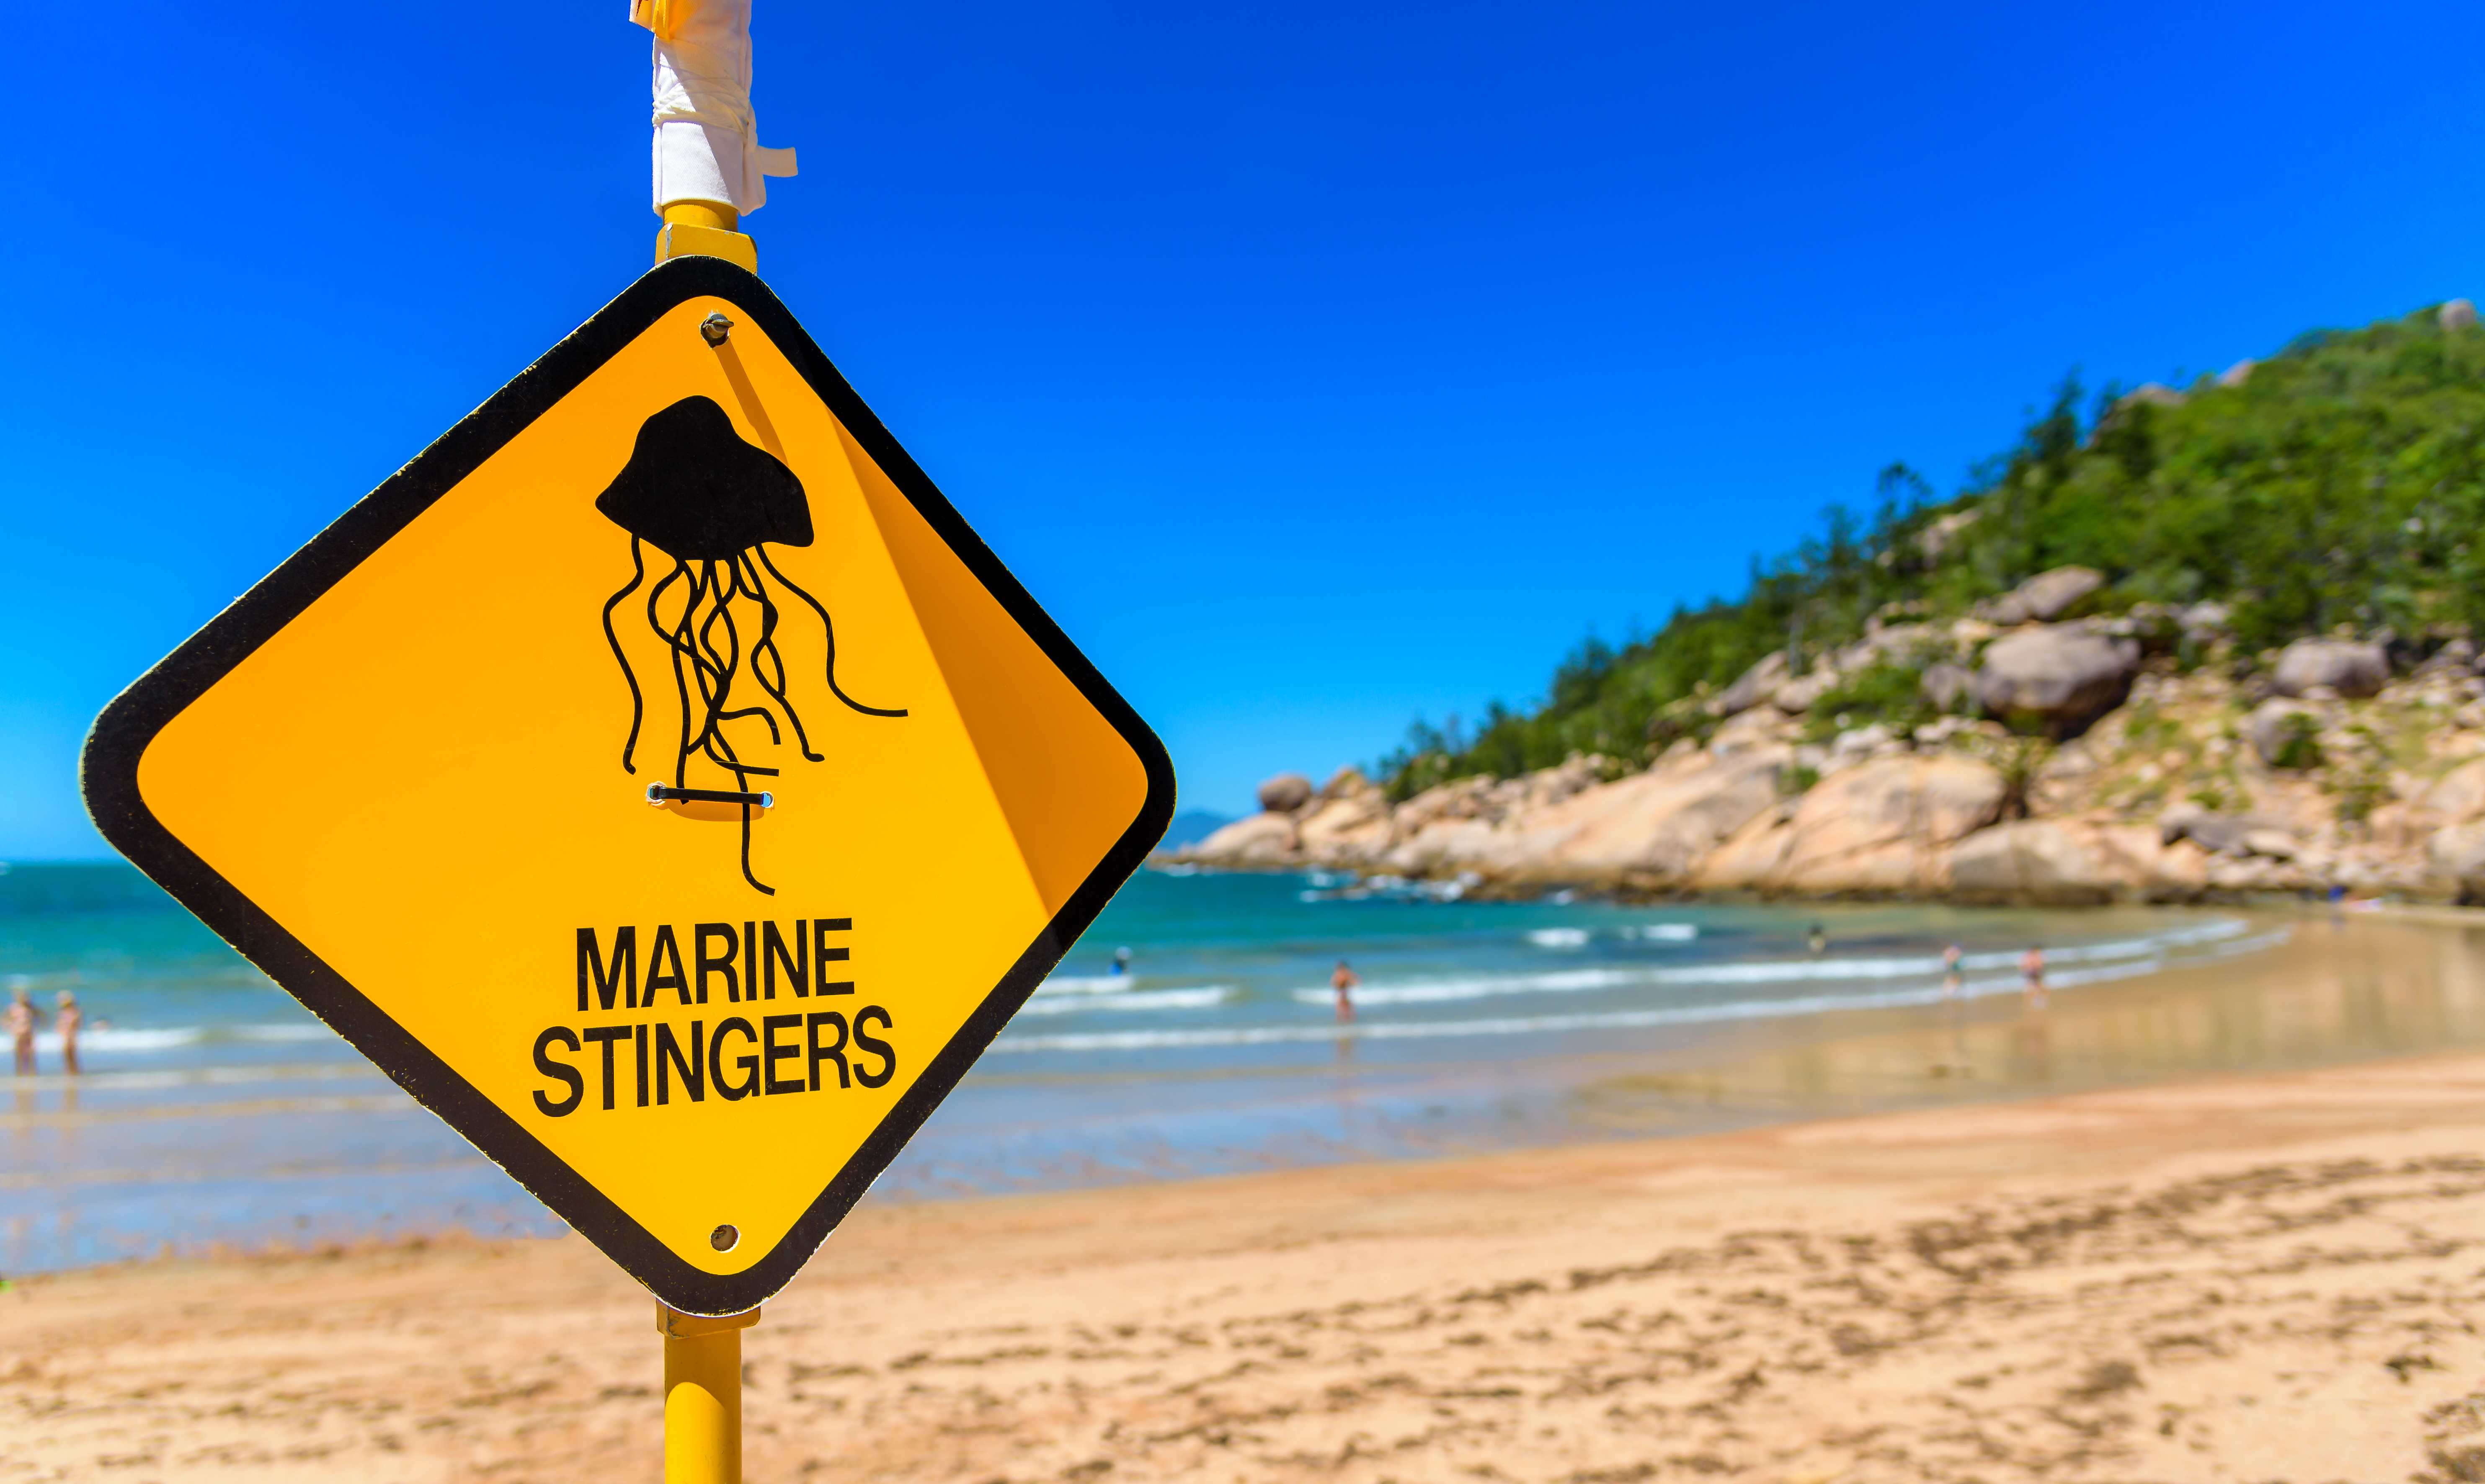 That's why the Australian authorities have to help out here. They warn of the invisible danger in the water in the most beautiful terribilis yellow. | Adam Calaitzis/Shutterstock.com